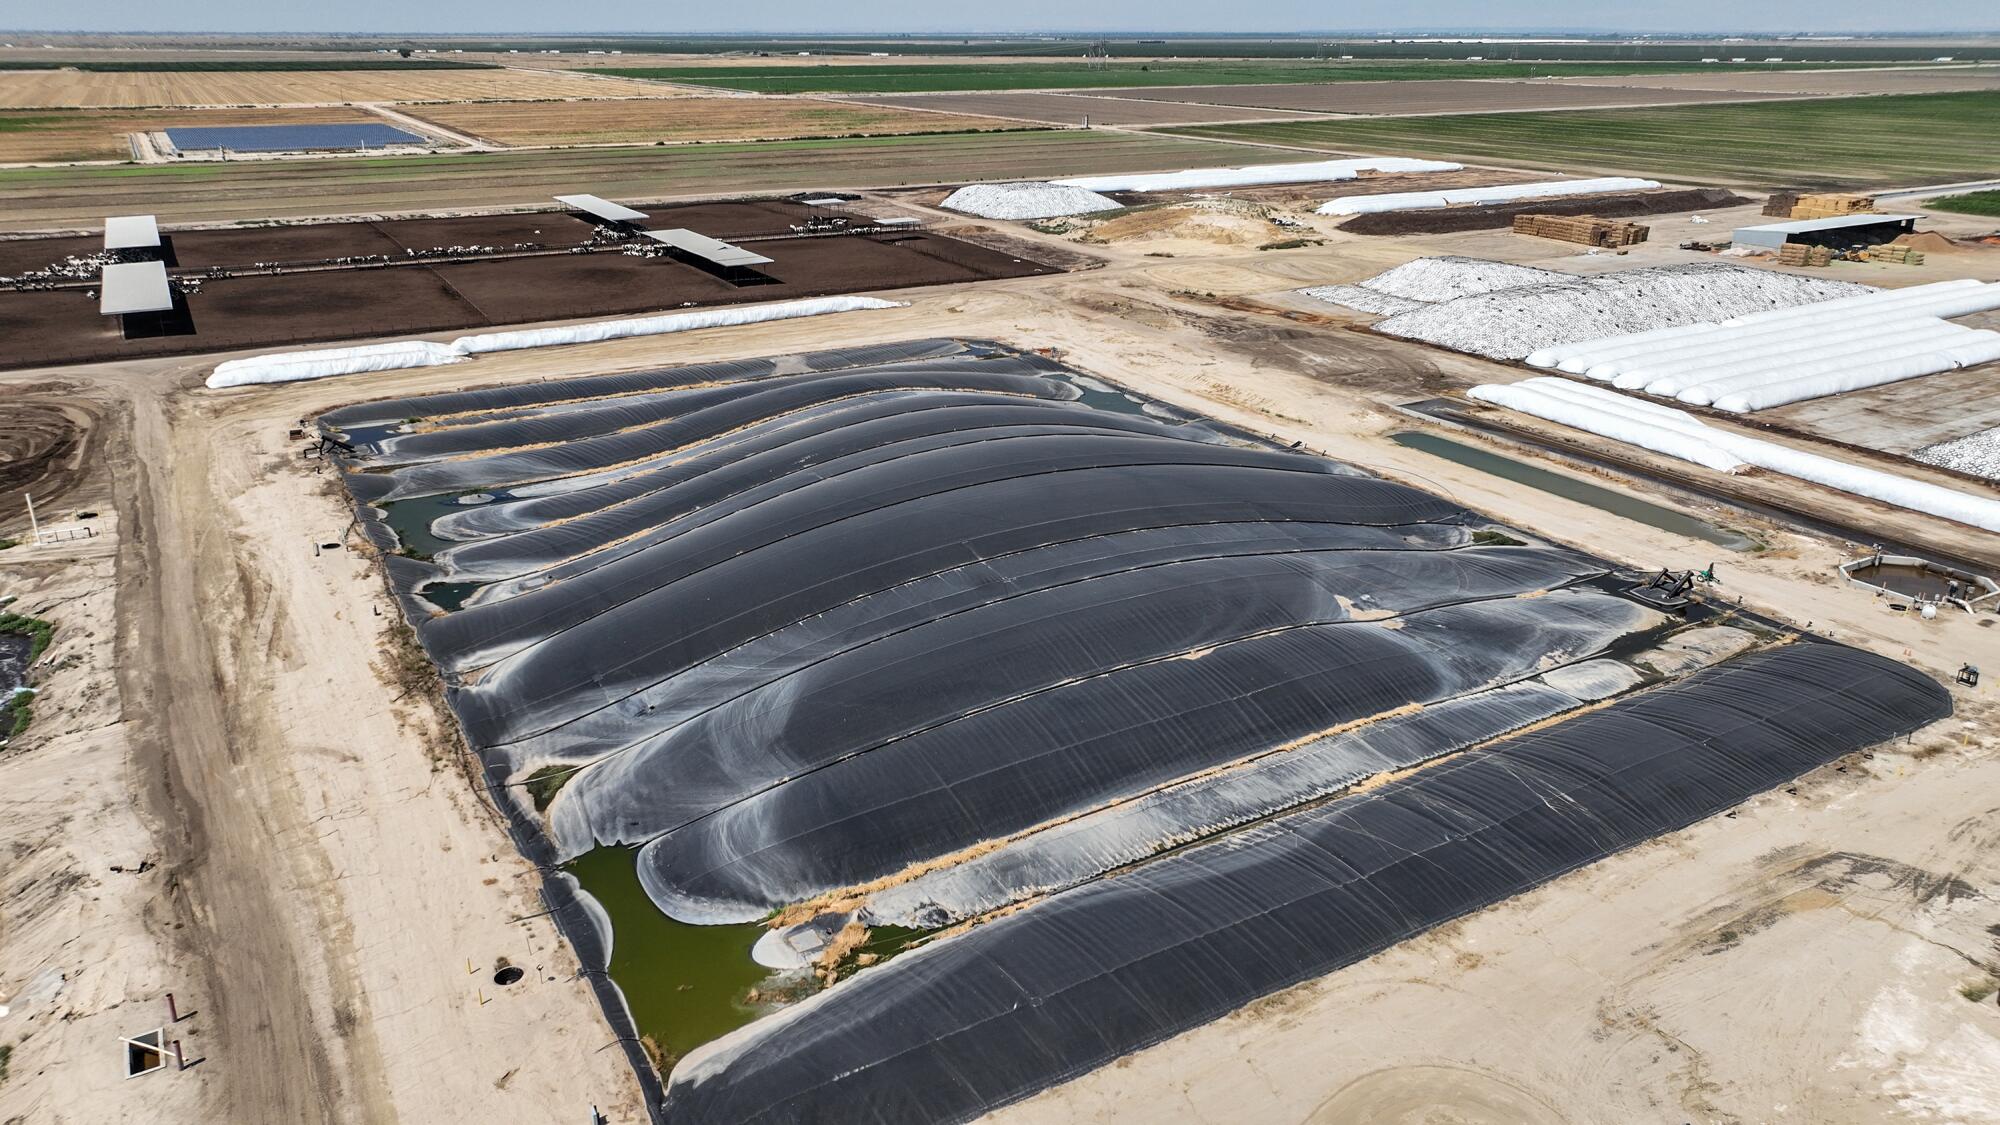 Large tarps capture methane from pools of processed cow manure. 